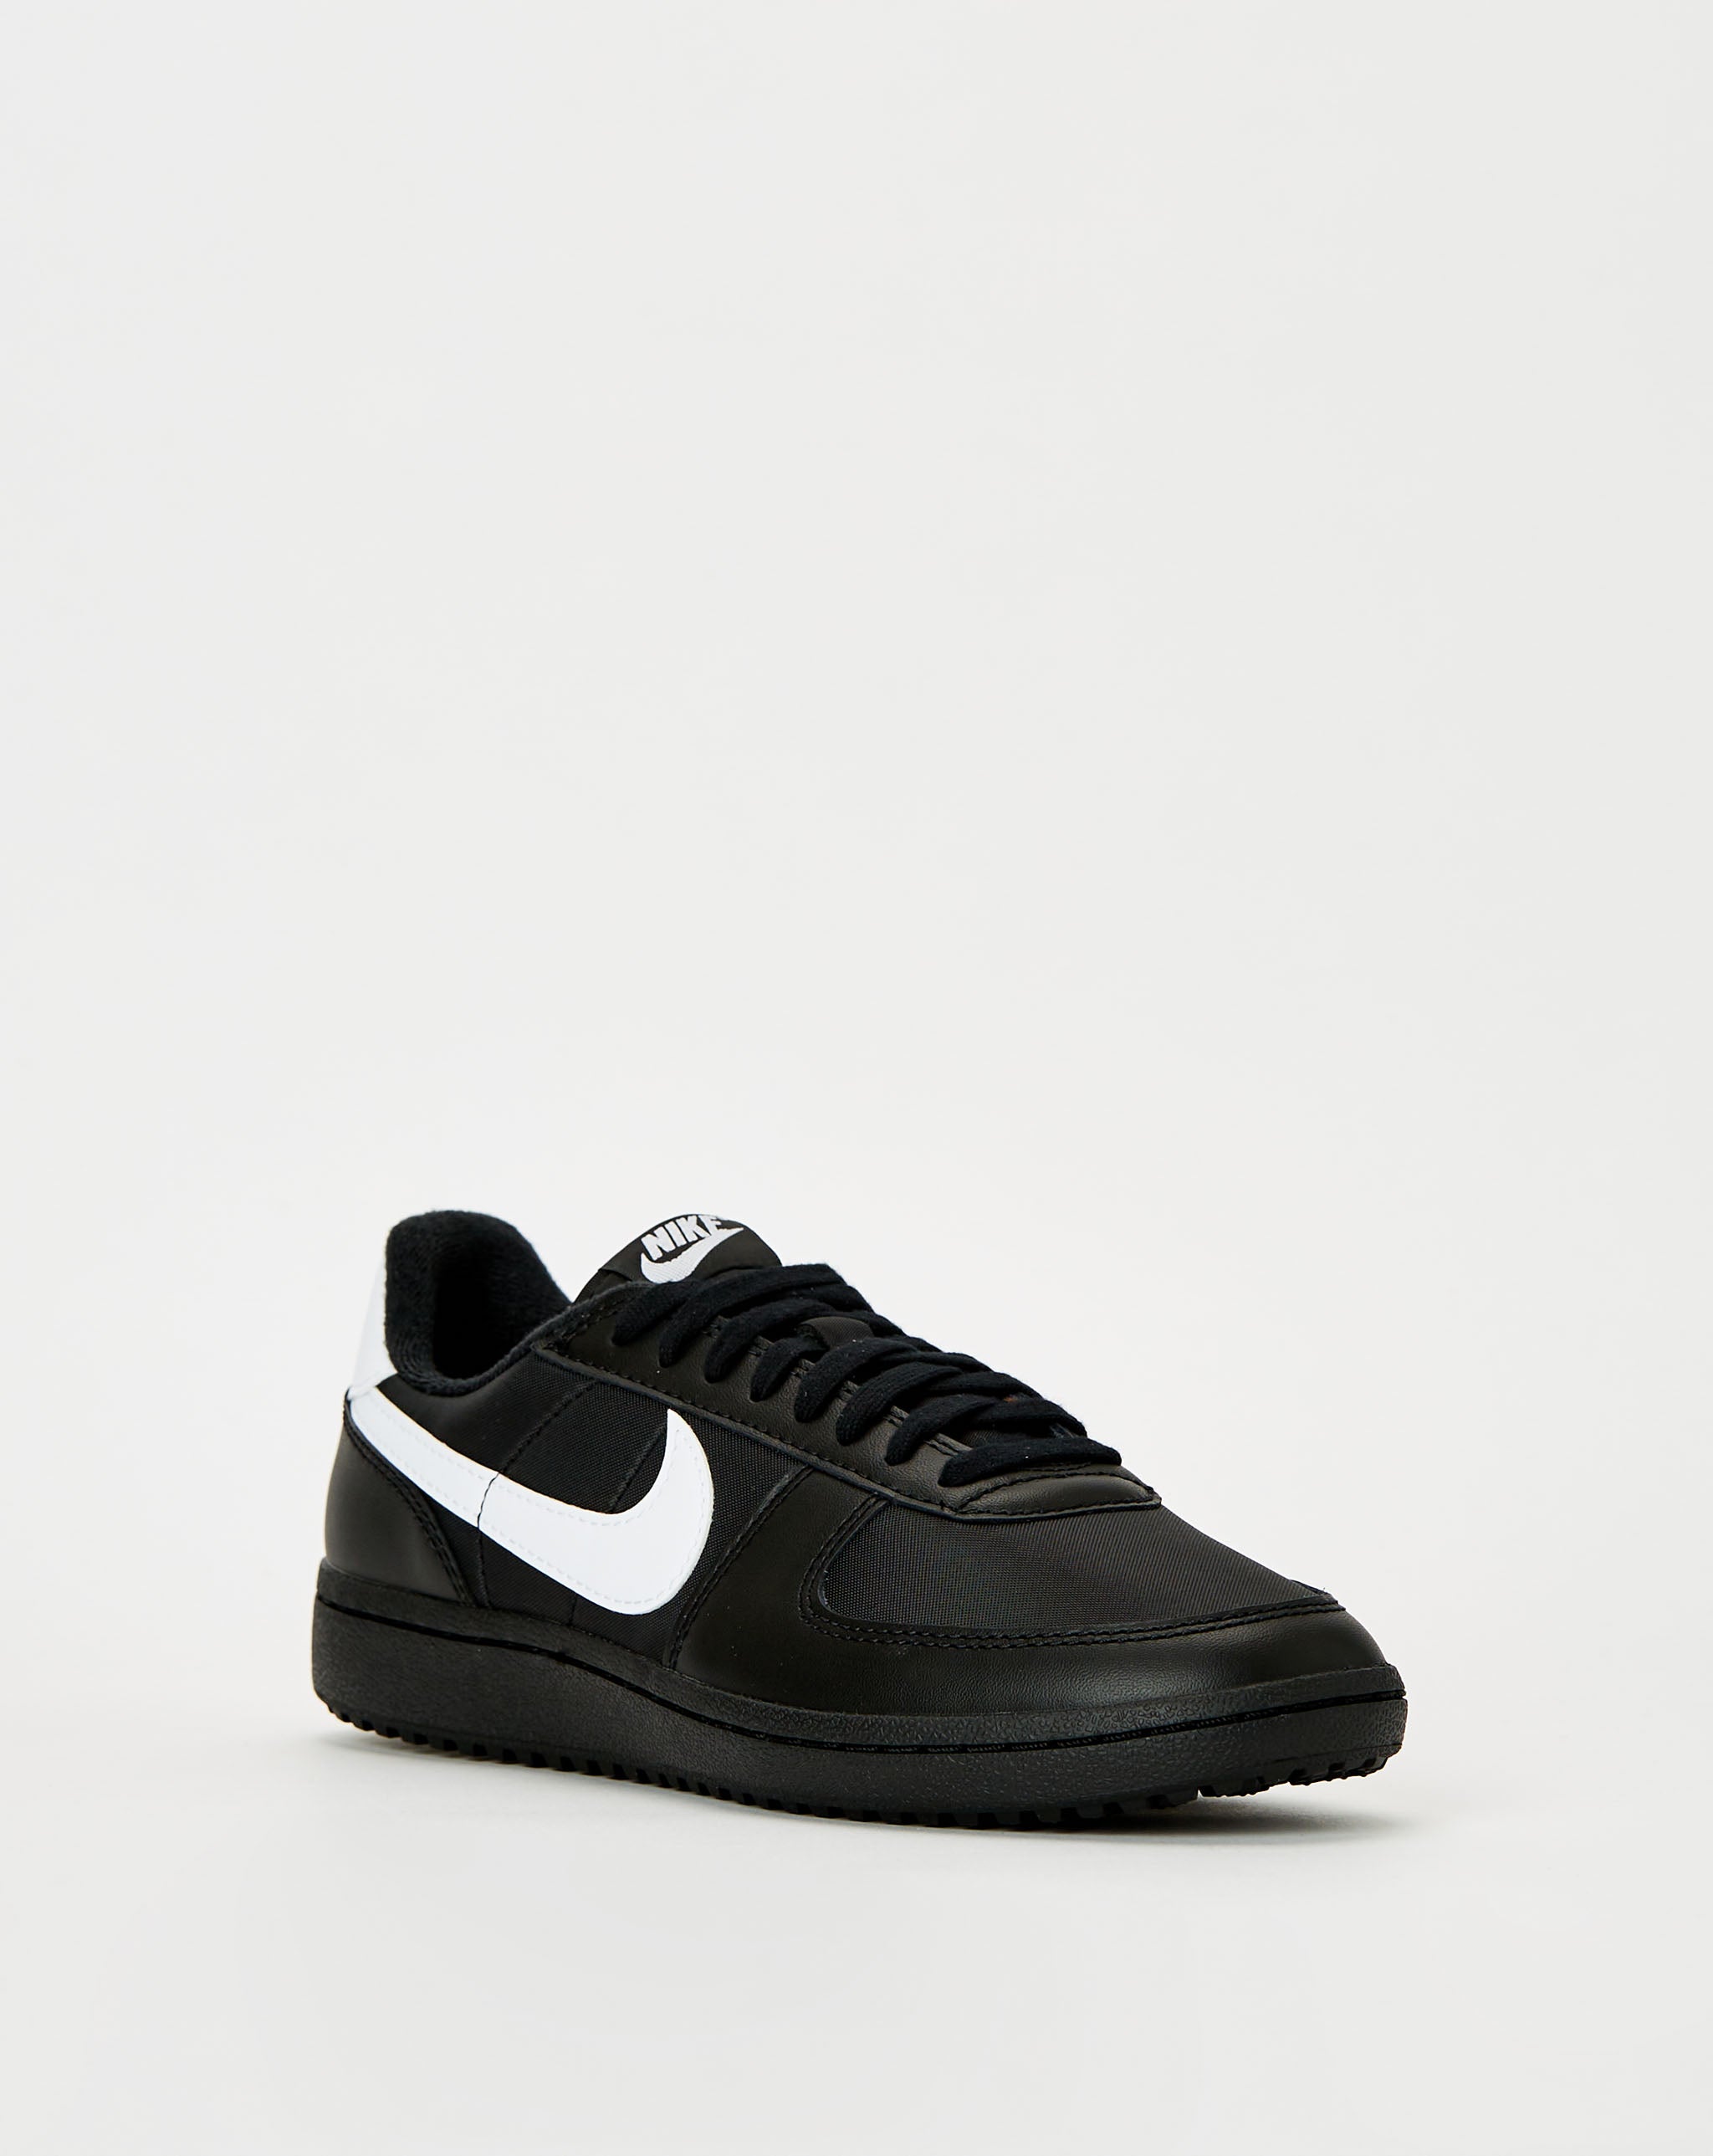 Nike Black | White | Black / 11 - Sold Out / 12 - Sold Out  - Cheap Urlfreeze Jordan outlet